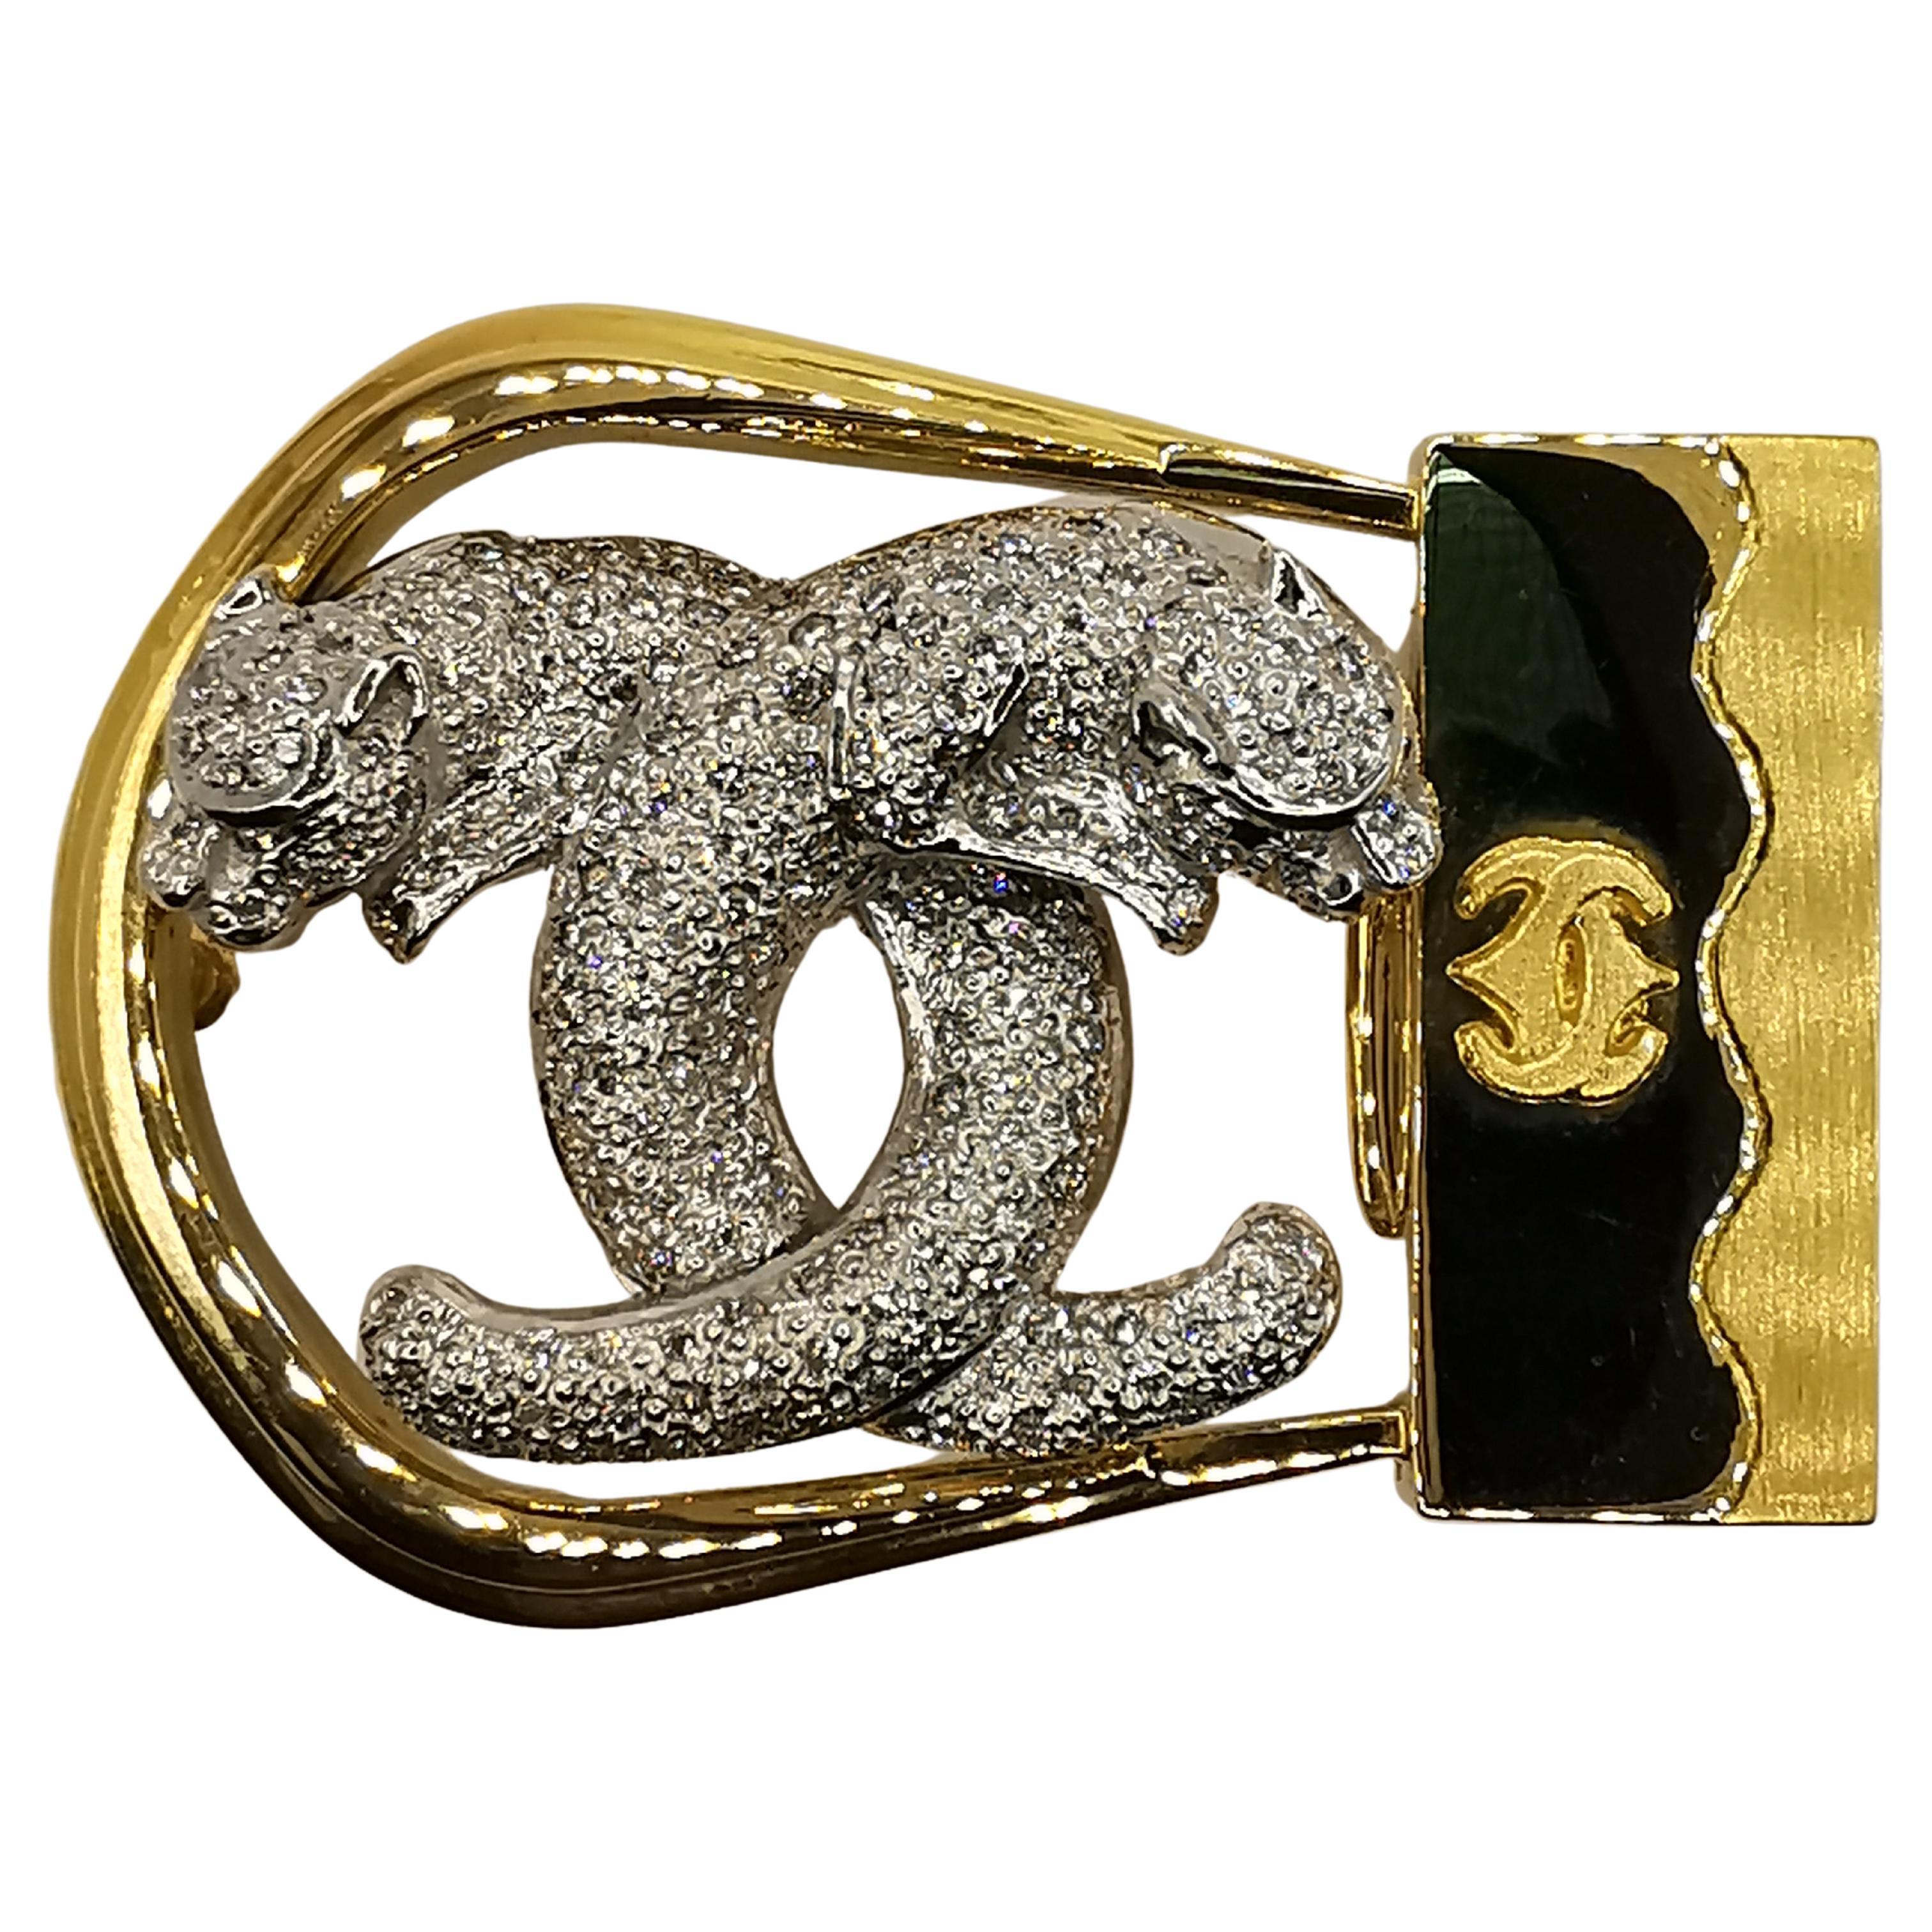 Double Jaguar 1.74 Carat Diamond Belt Buckle in 18k Yellow and White Gold